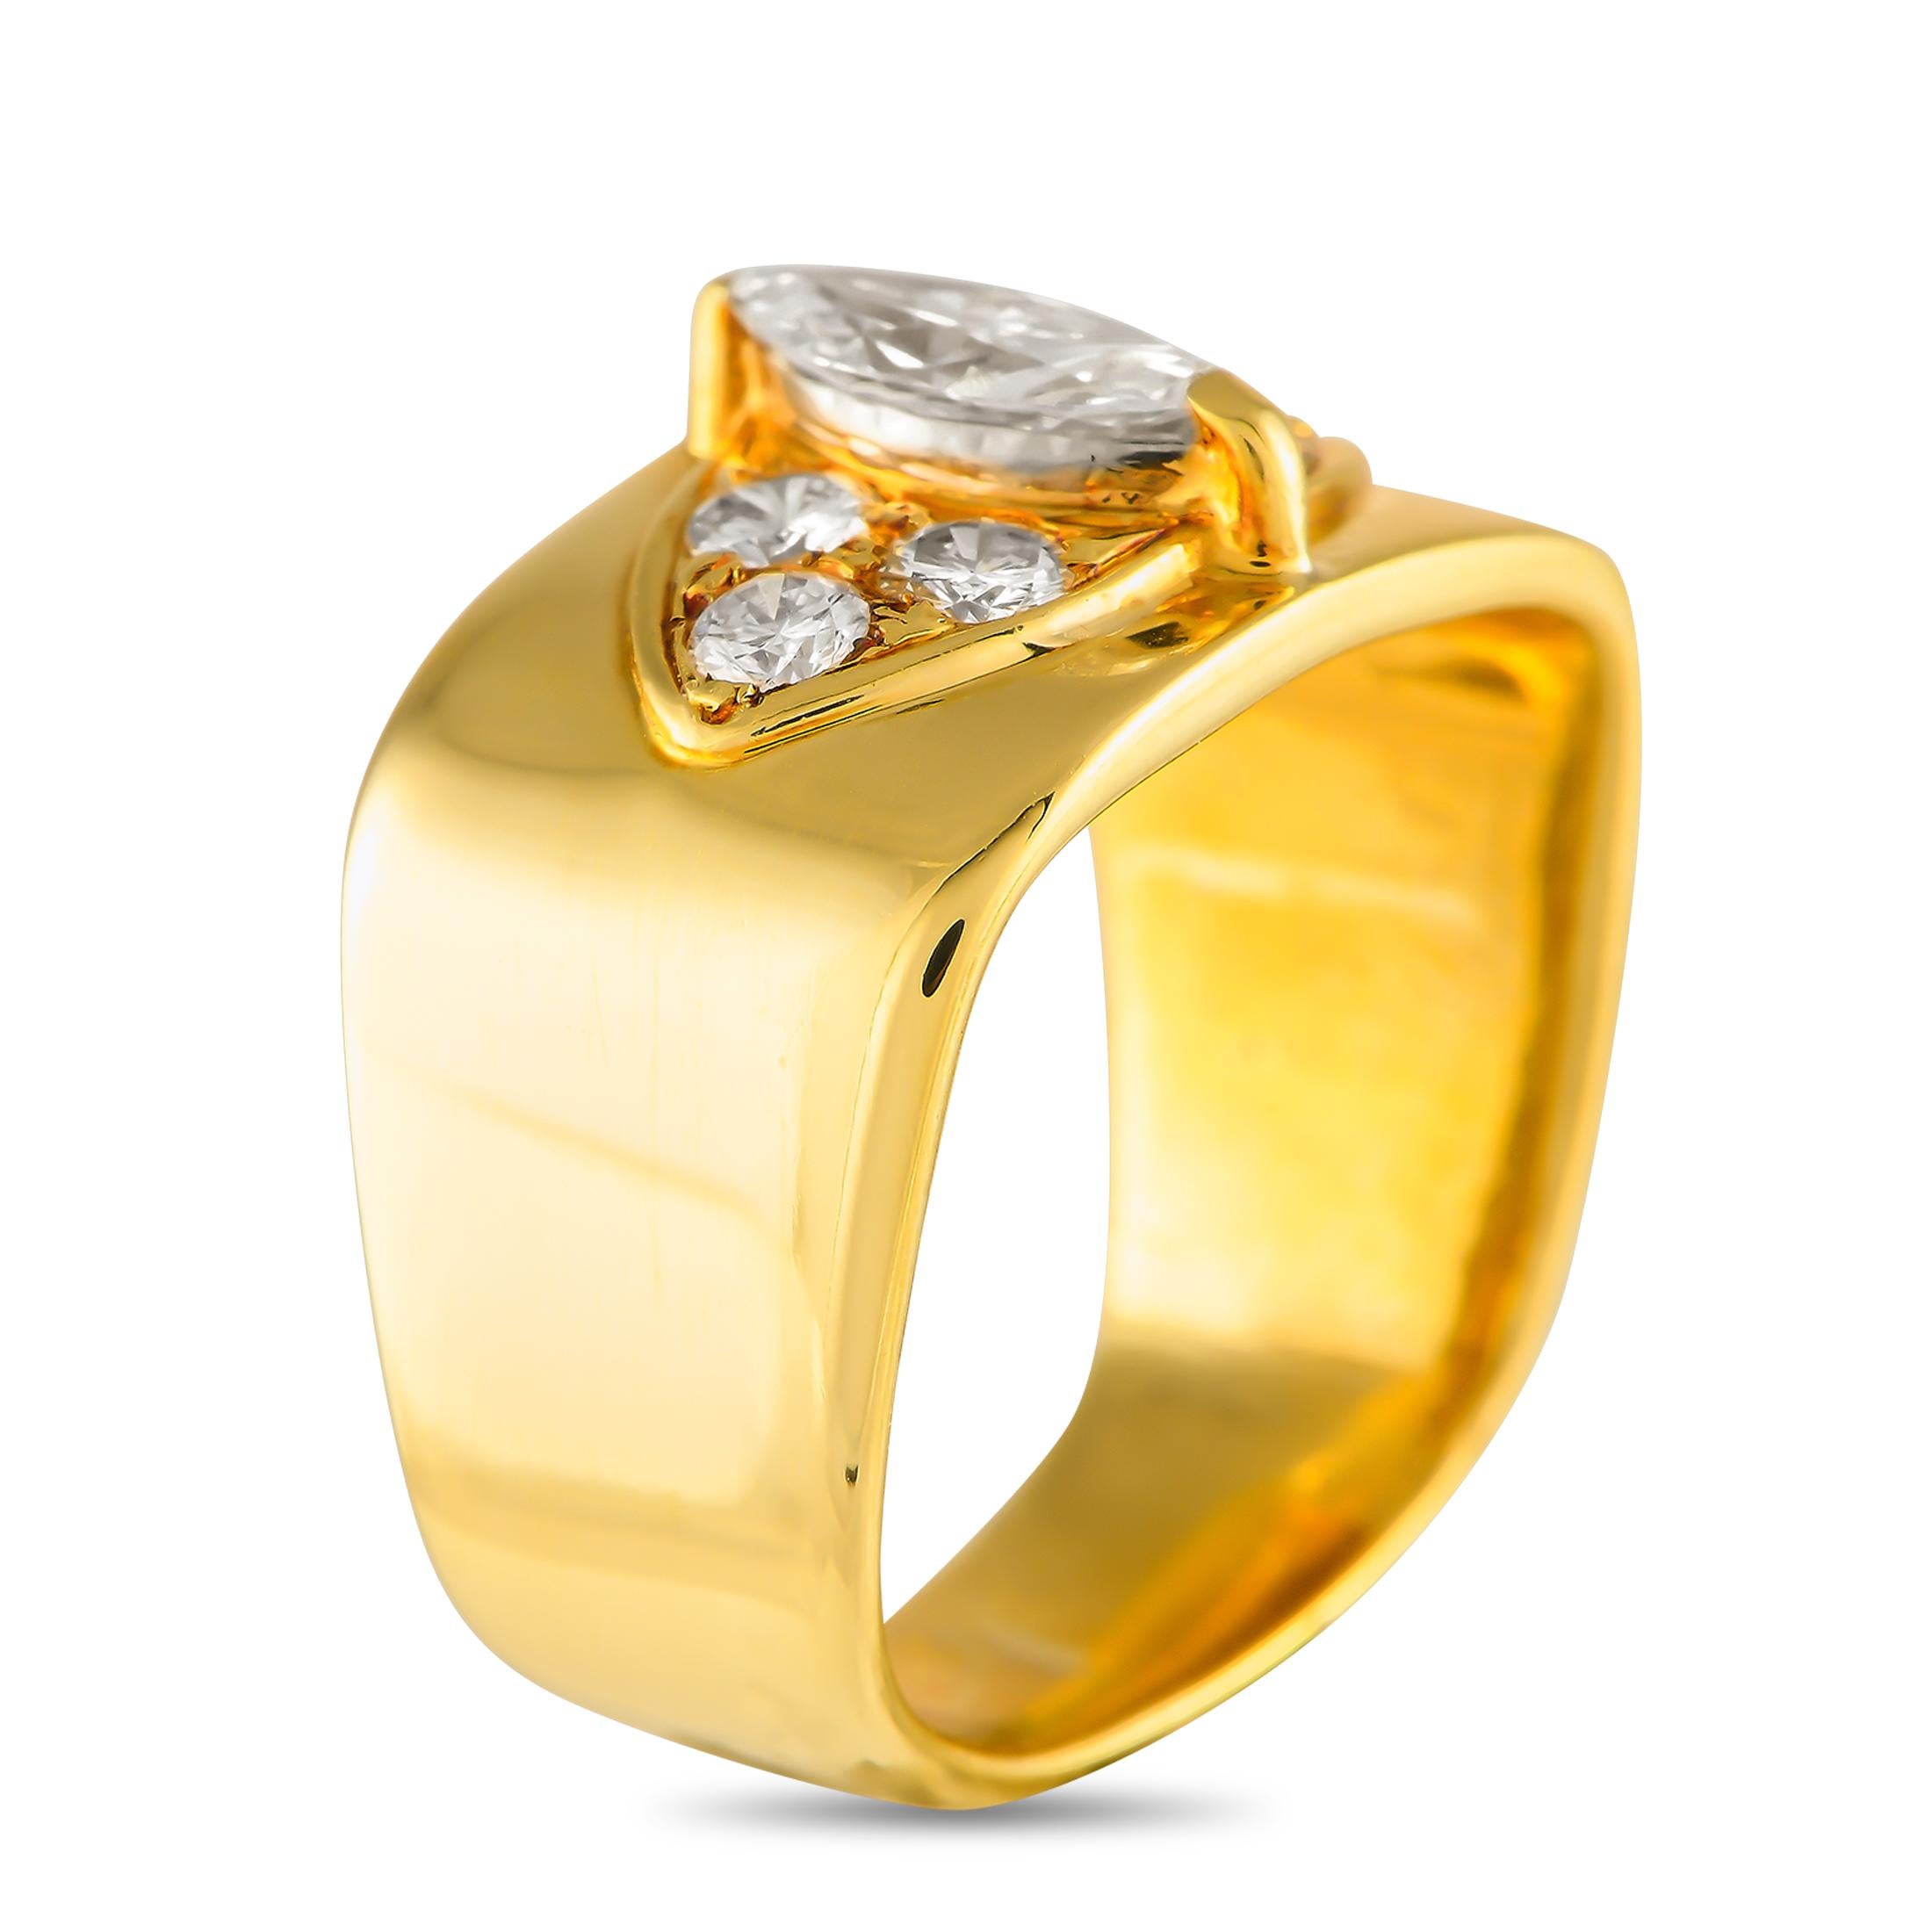 A sleek 14K Yellow Gold setting with rounded edges make this ring a unique addition to any jewelry collection. At the center of the bold band  which measures 6mm wide  youll find a dynamic arrangement of Diamonds with a total weight of 0.60 carats.